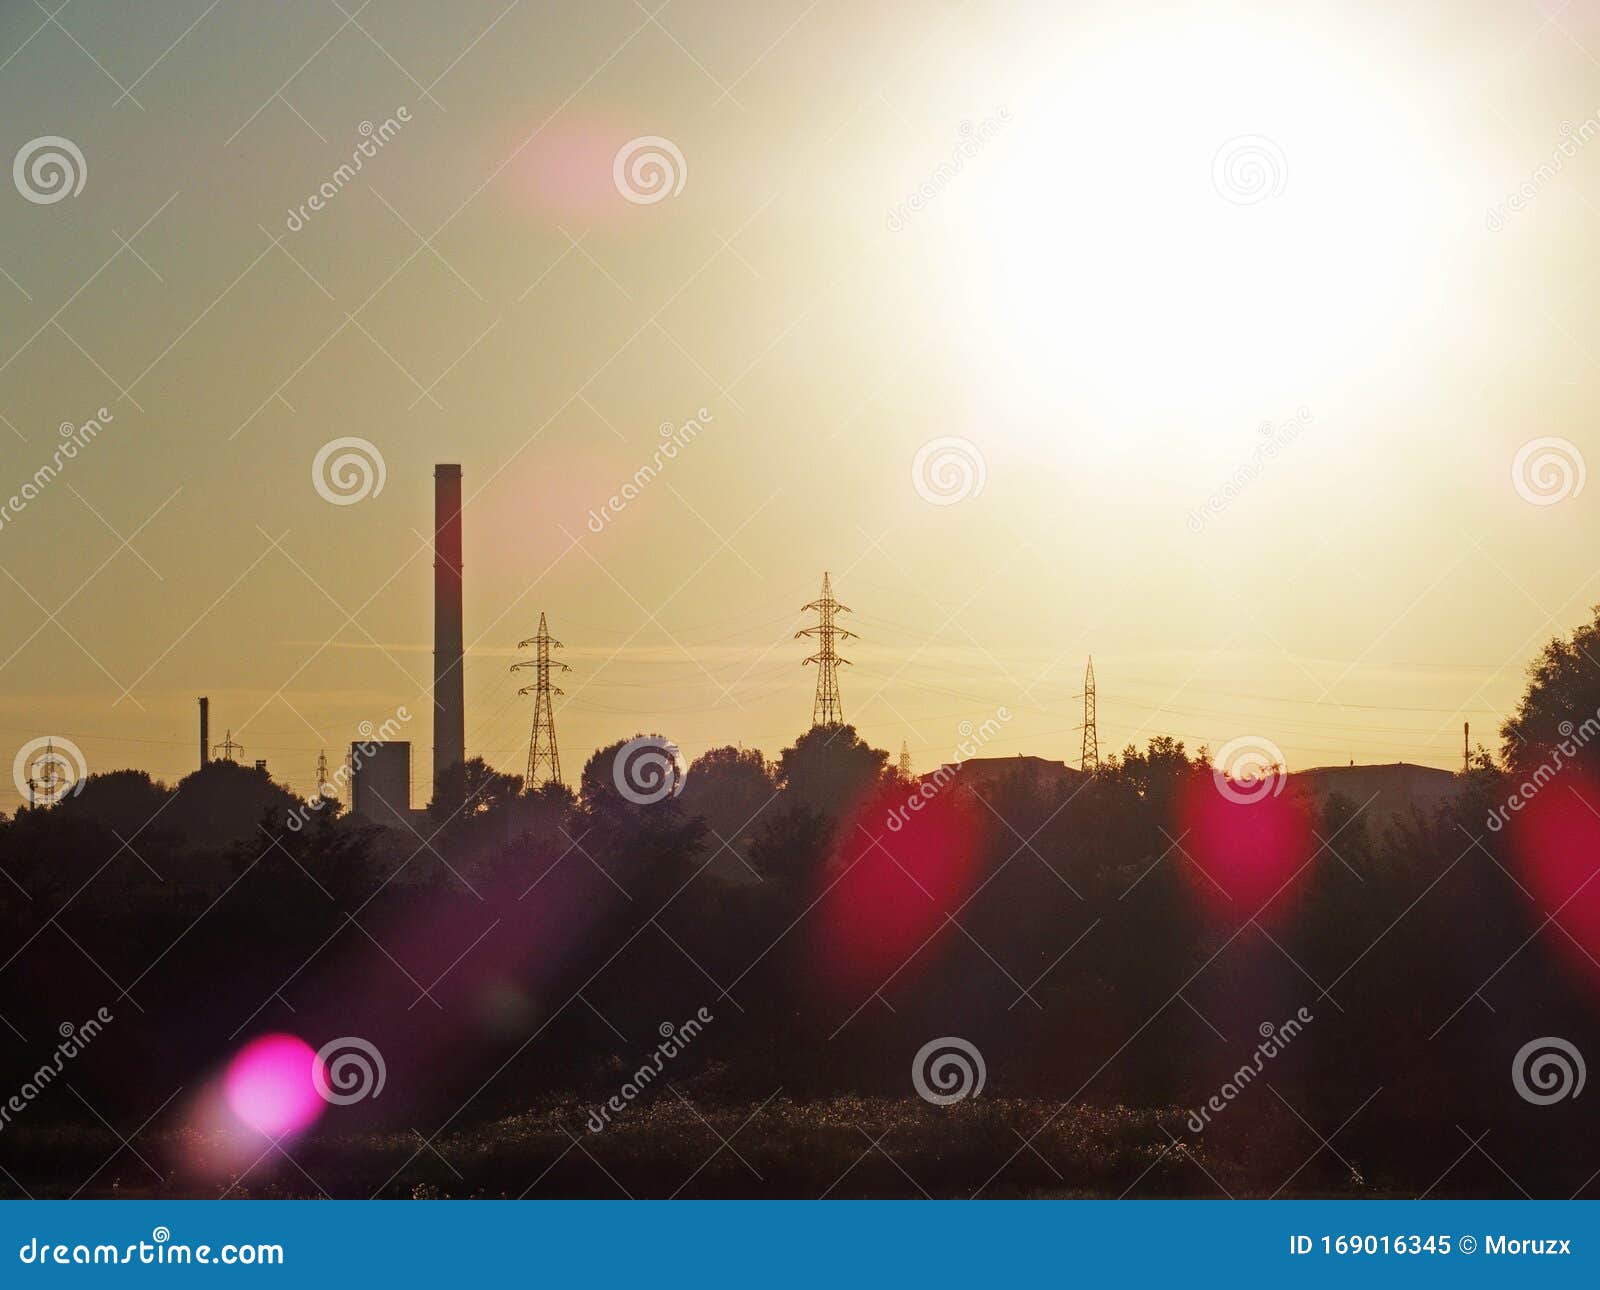 thermal power plant and electricity lines silhouette at sunset